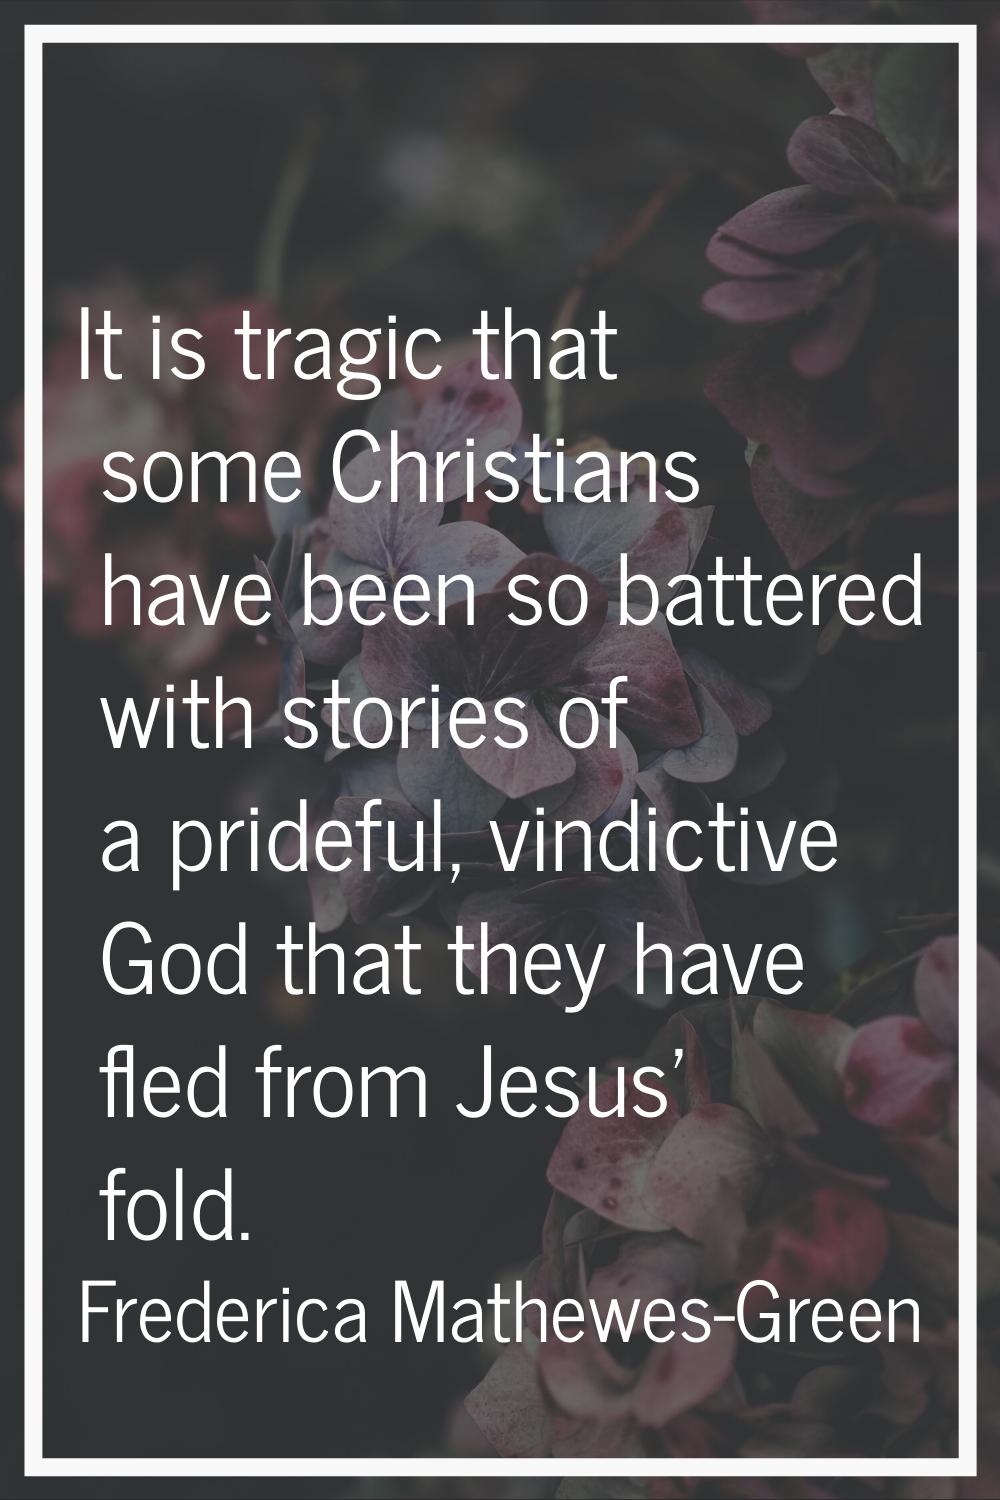 It is tragic that some Christians have been so battered with stories of a prideful, vindictive God 